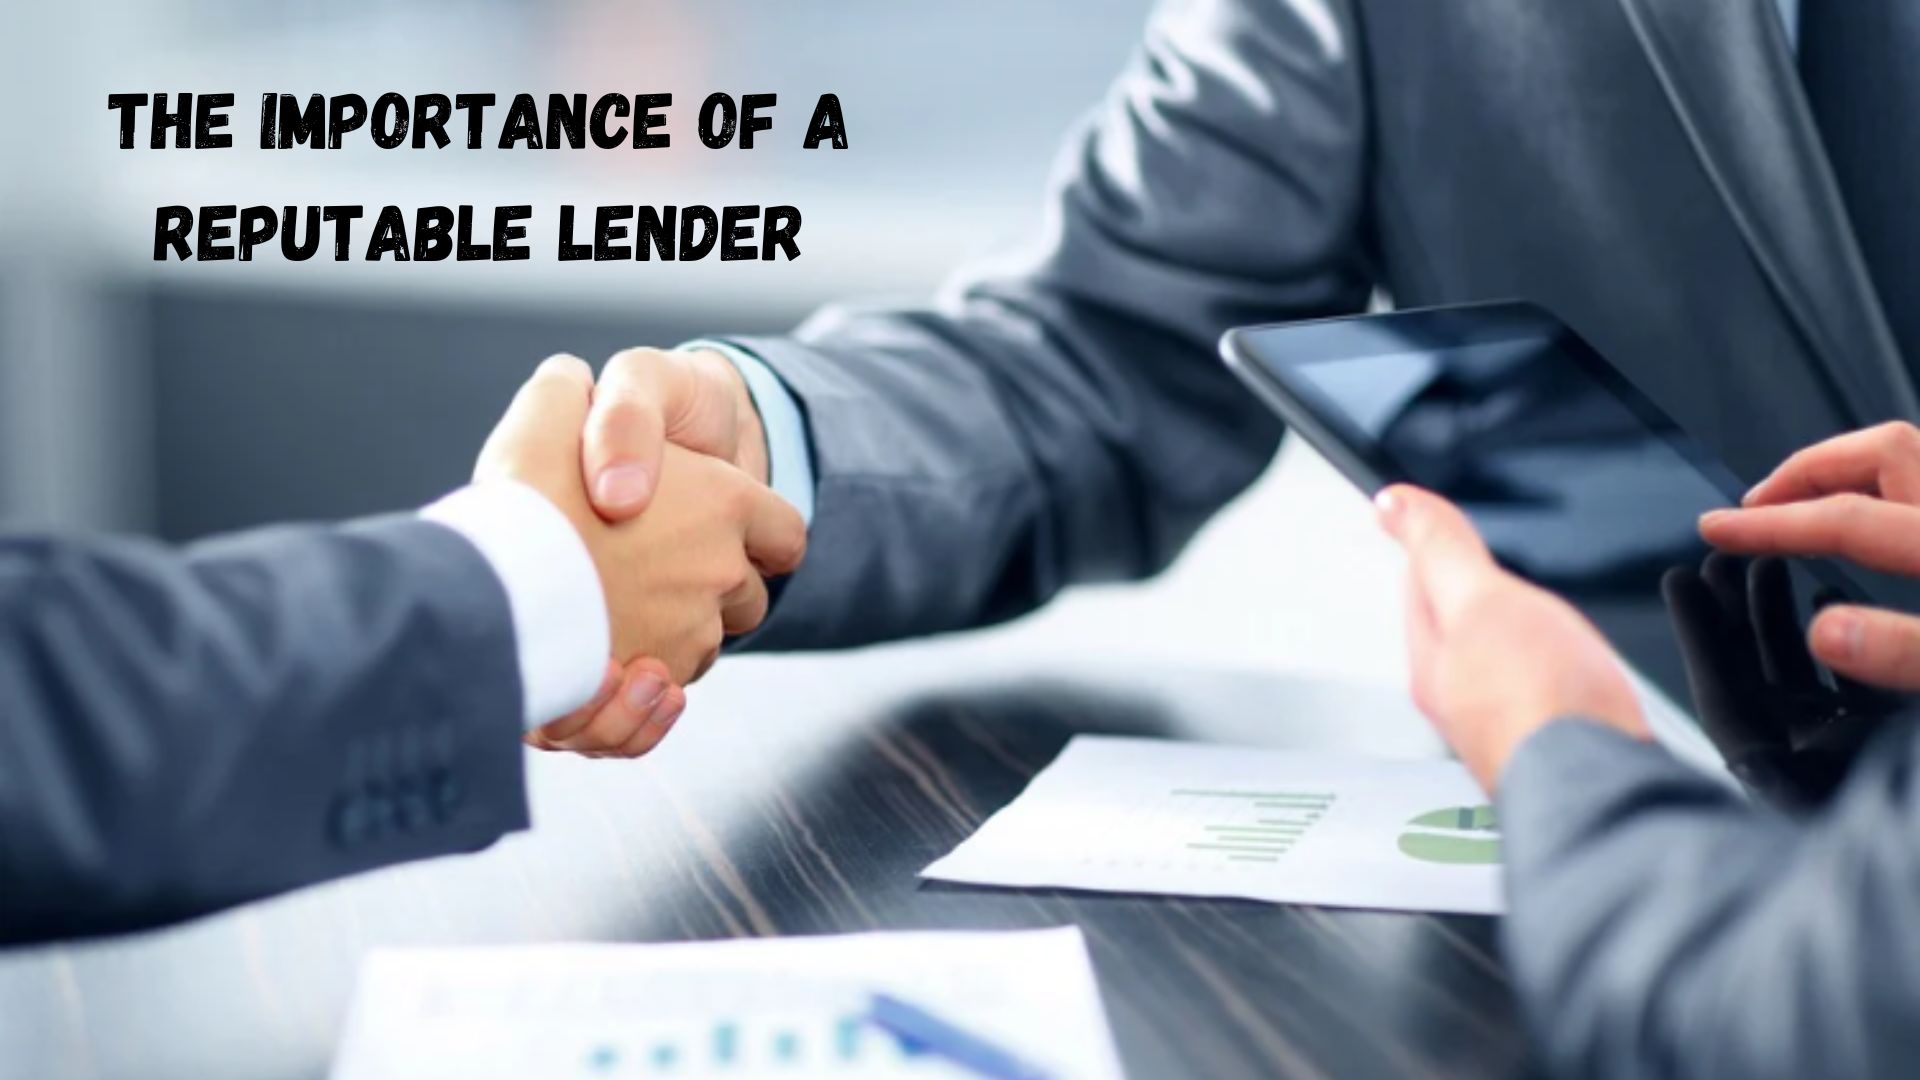 The Importance of a Reputable Lender.